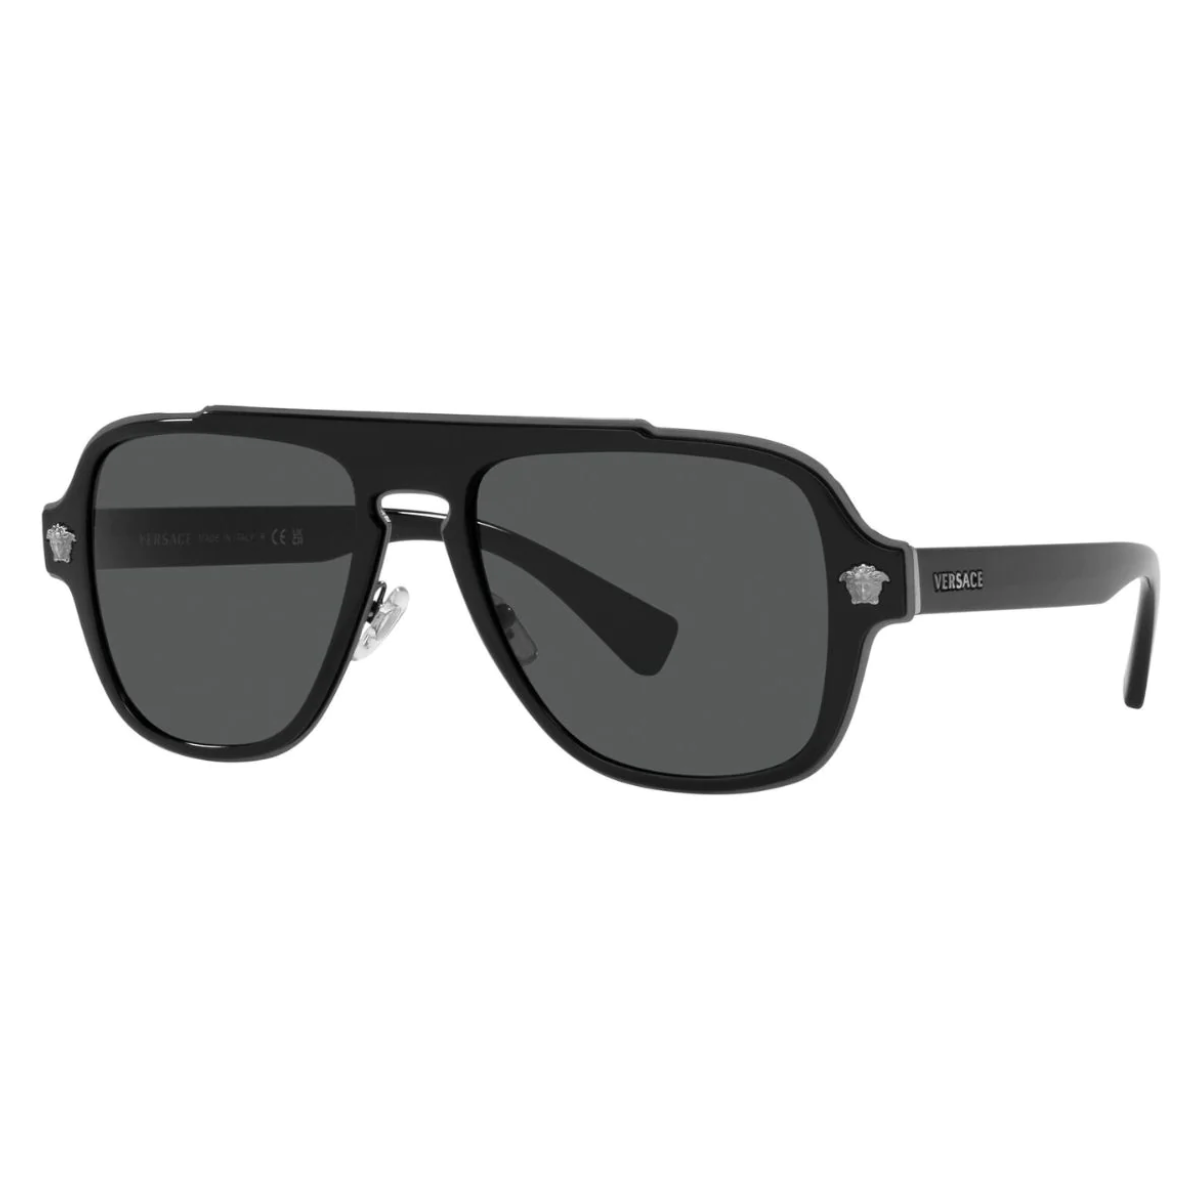 ""Get the latest Versace 2199 1001/87 Sunglasses for Men and Women at Optorium! Upgrade your style today!"